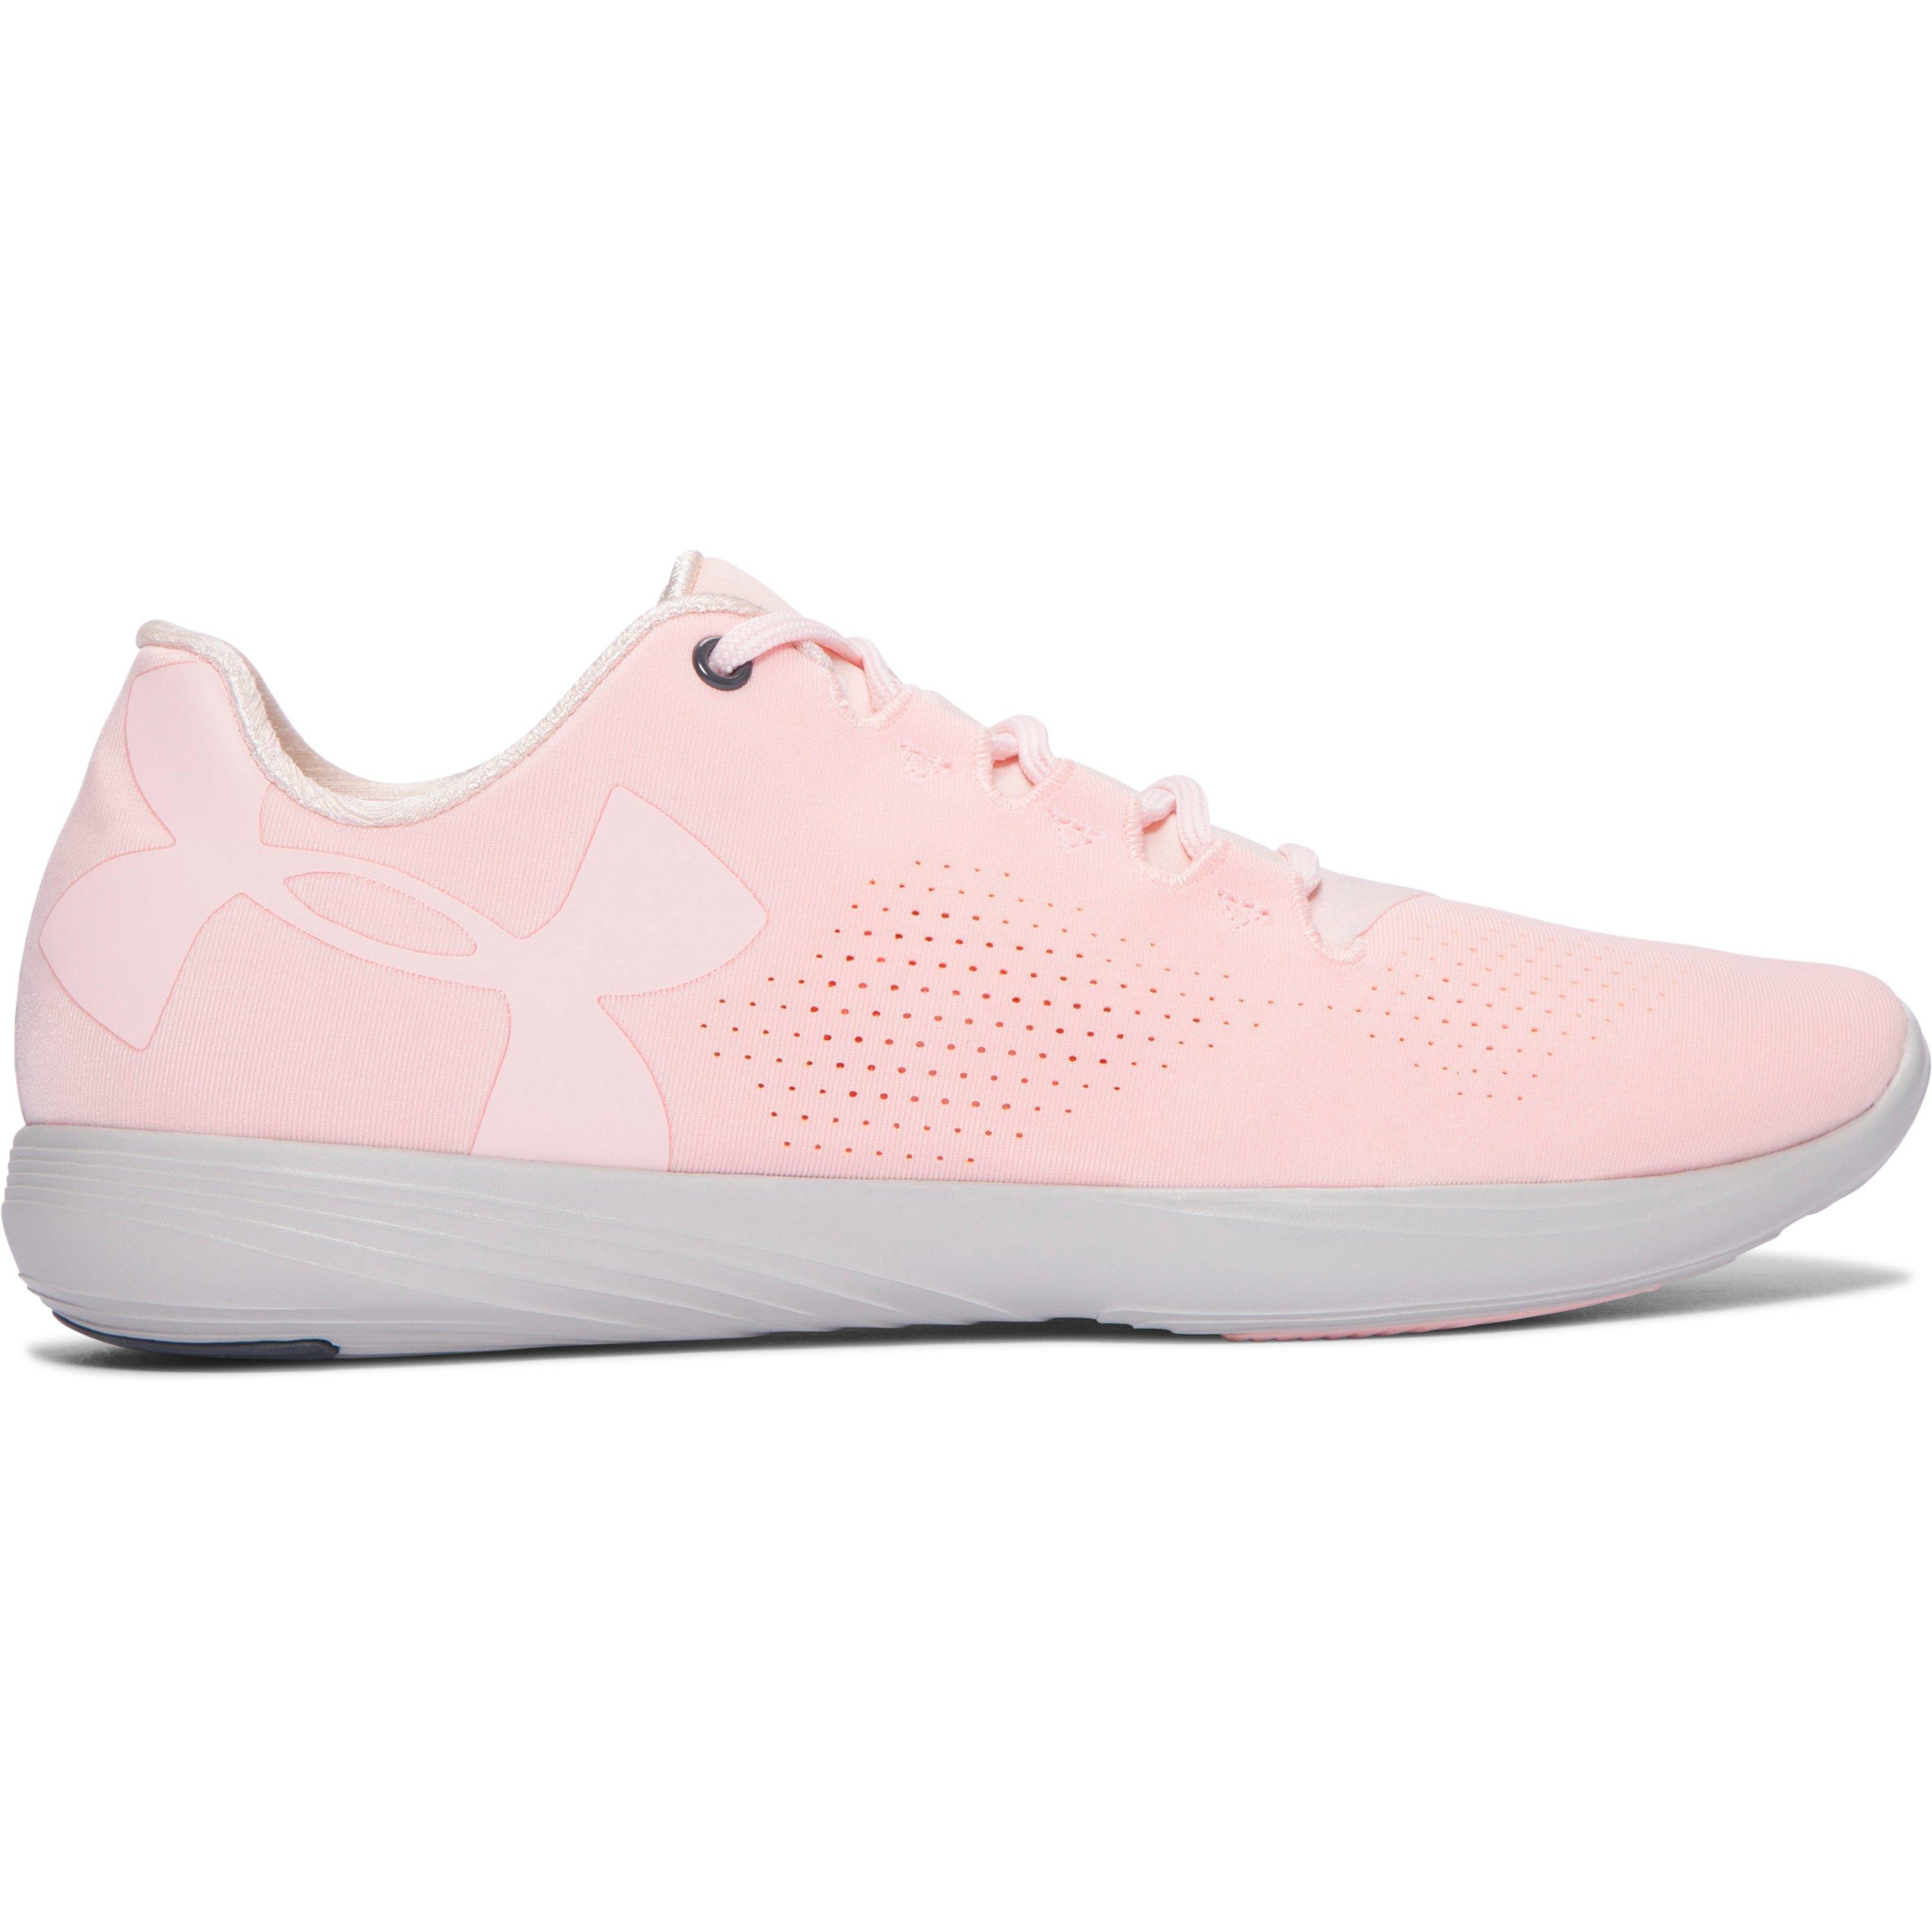 pink and gray under armour shoes